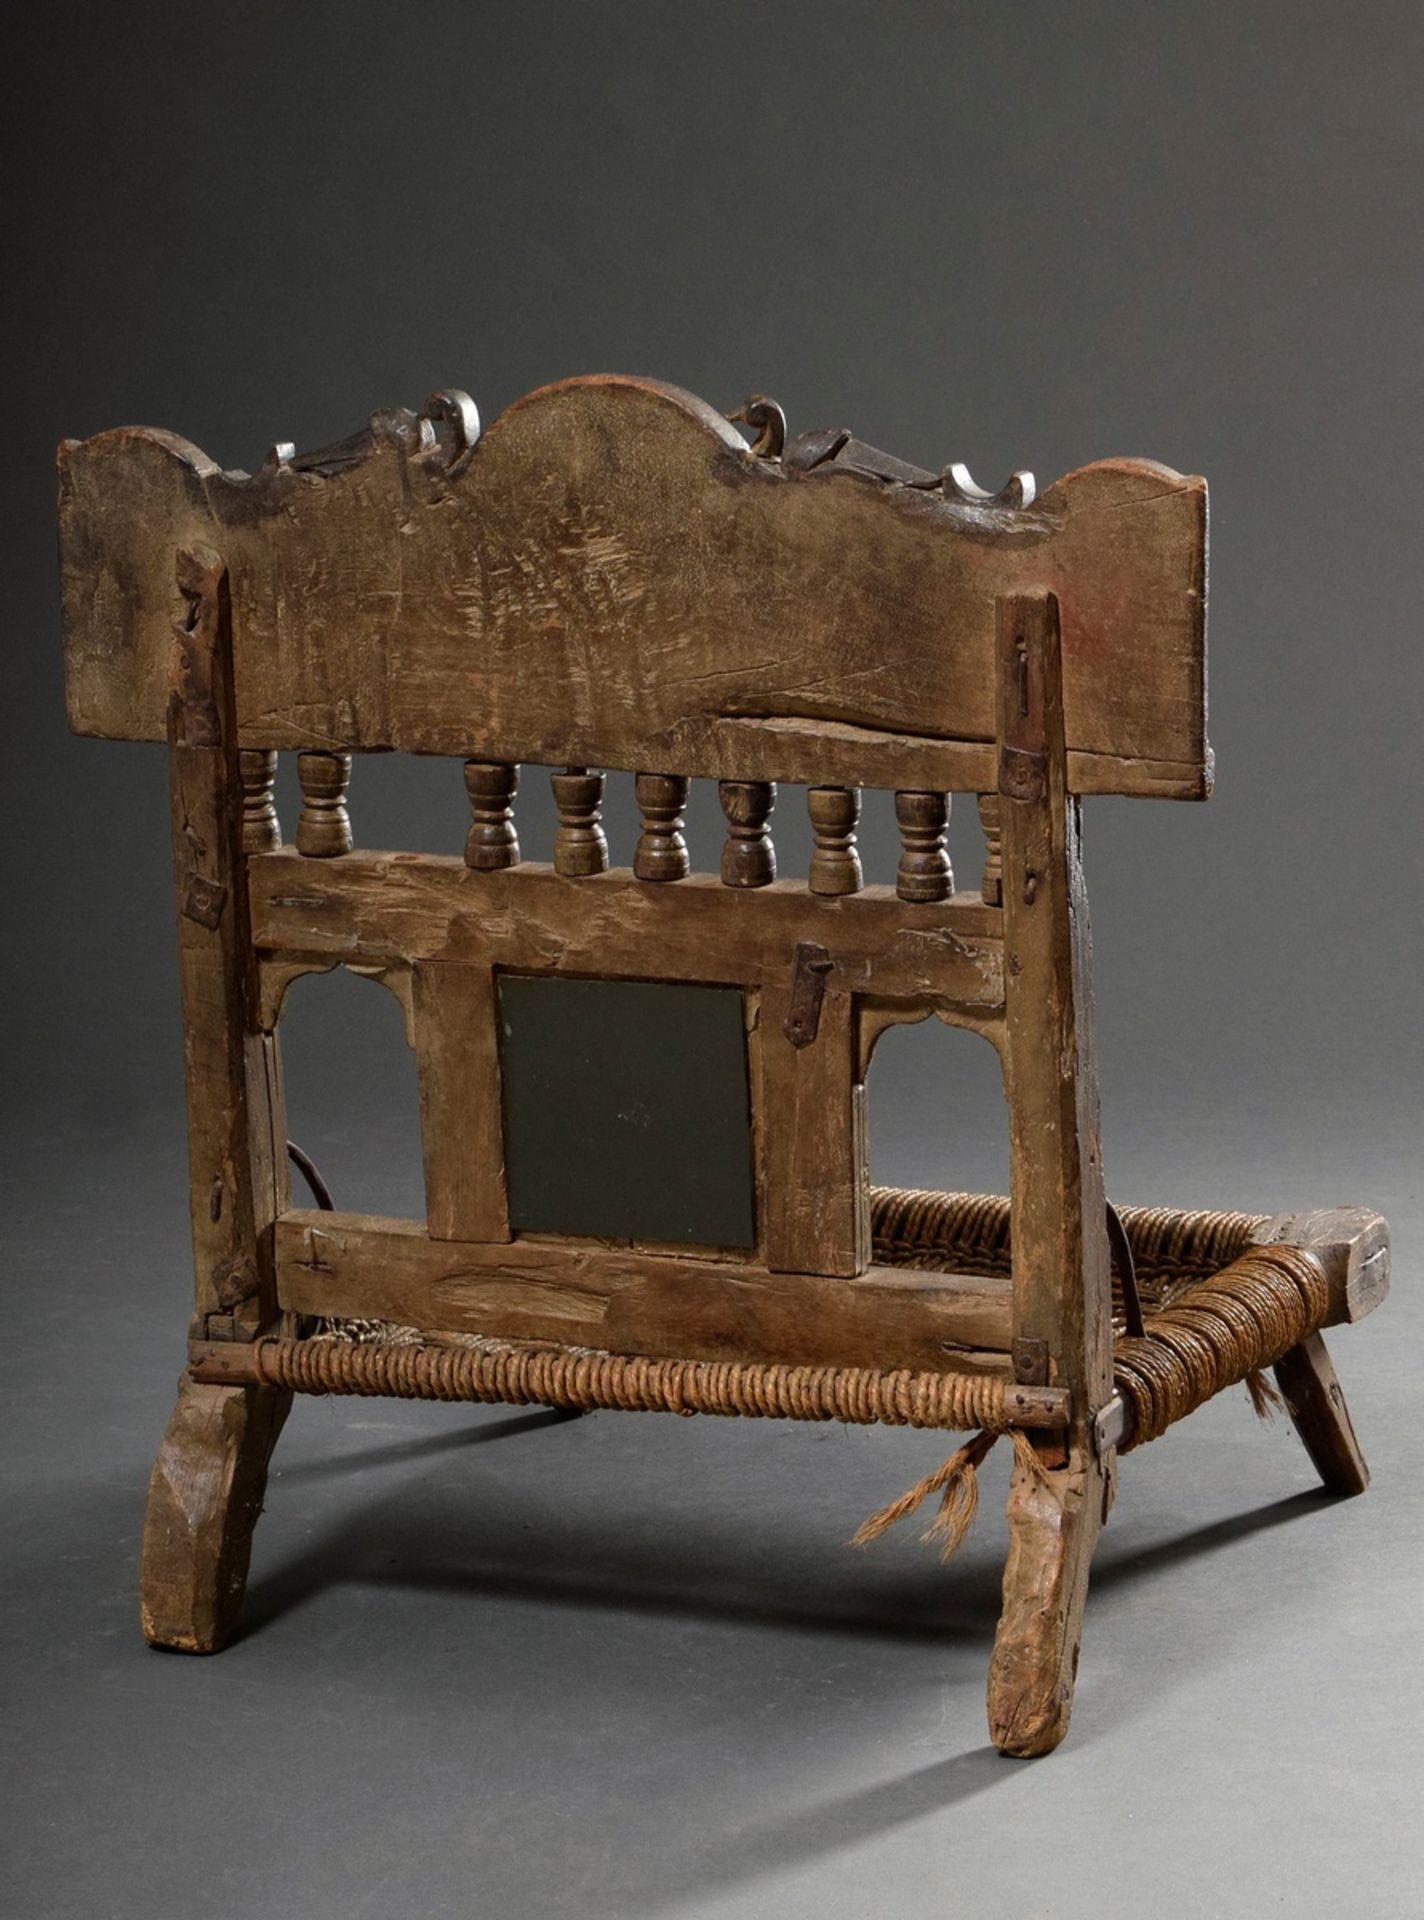 Indian wedding chair with richly carved frame "horses, peacocks and rosettes", around 1900, wood wi - Image 4 of 6